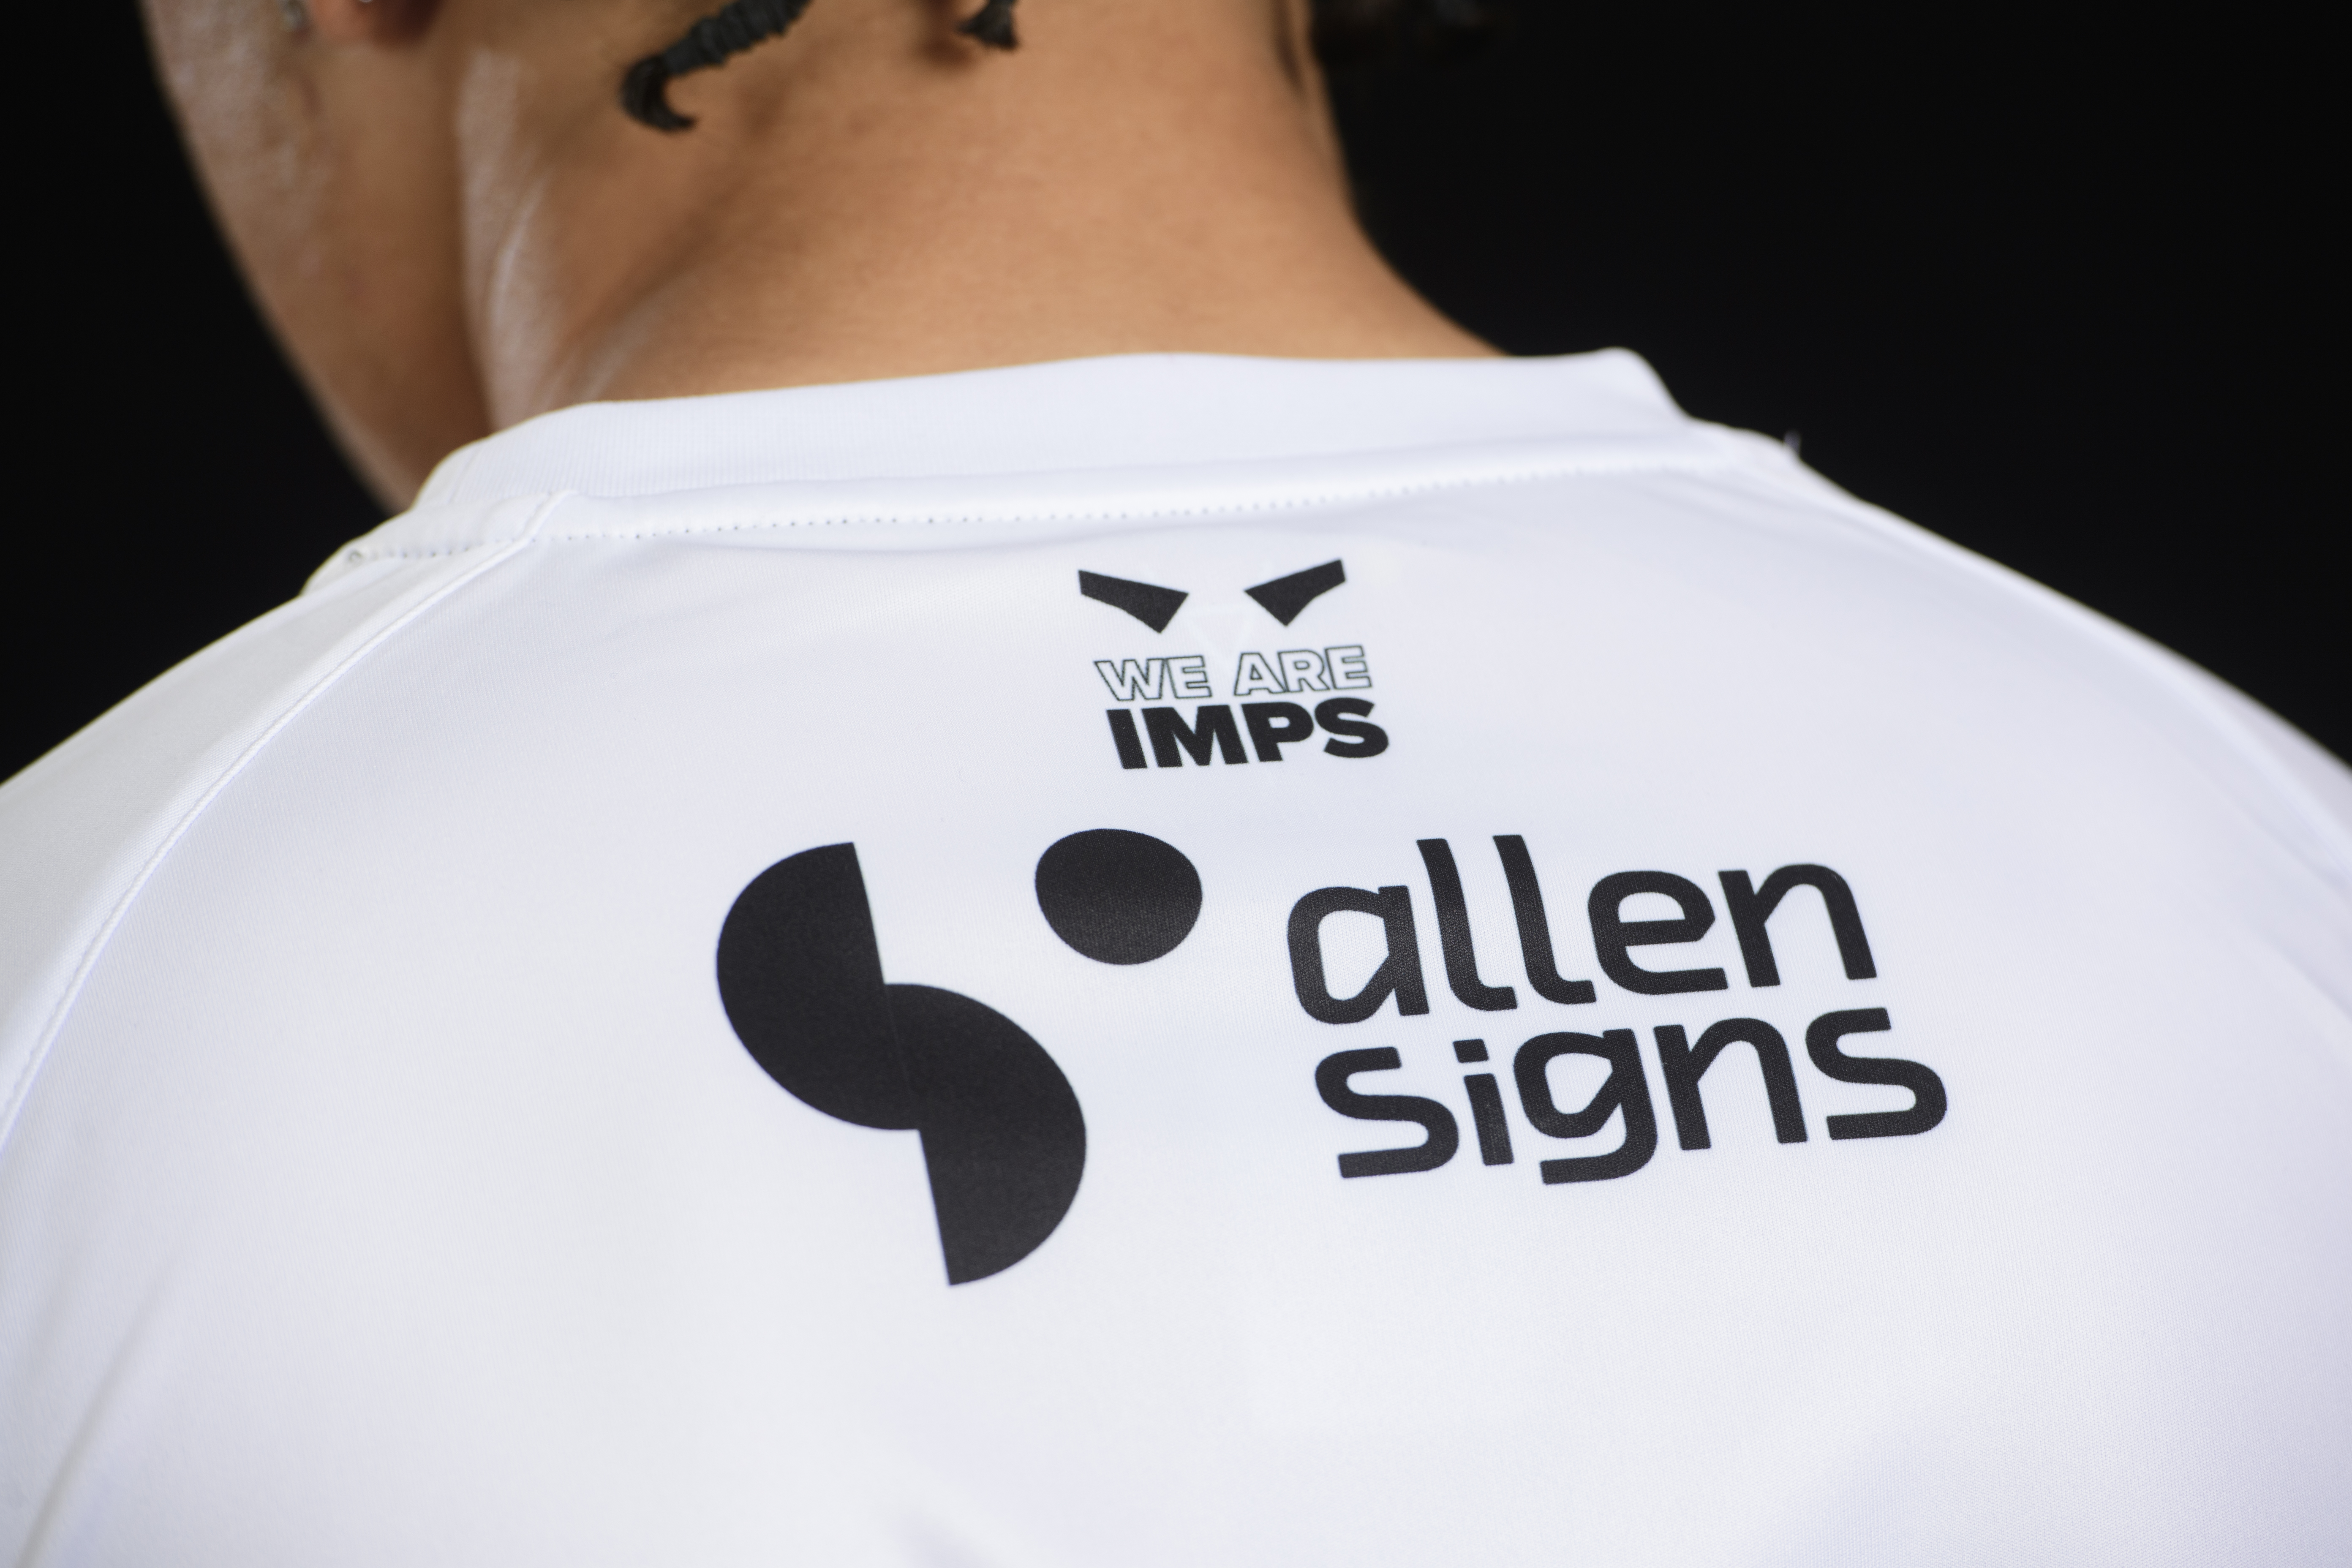 A close up of the back of the 24/25 away shirt design focused on the We Are Imps design and Allen Signs logo.